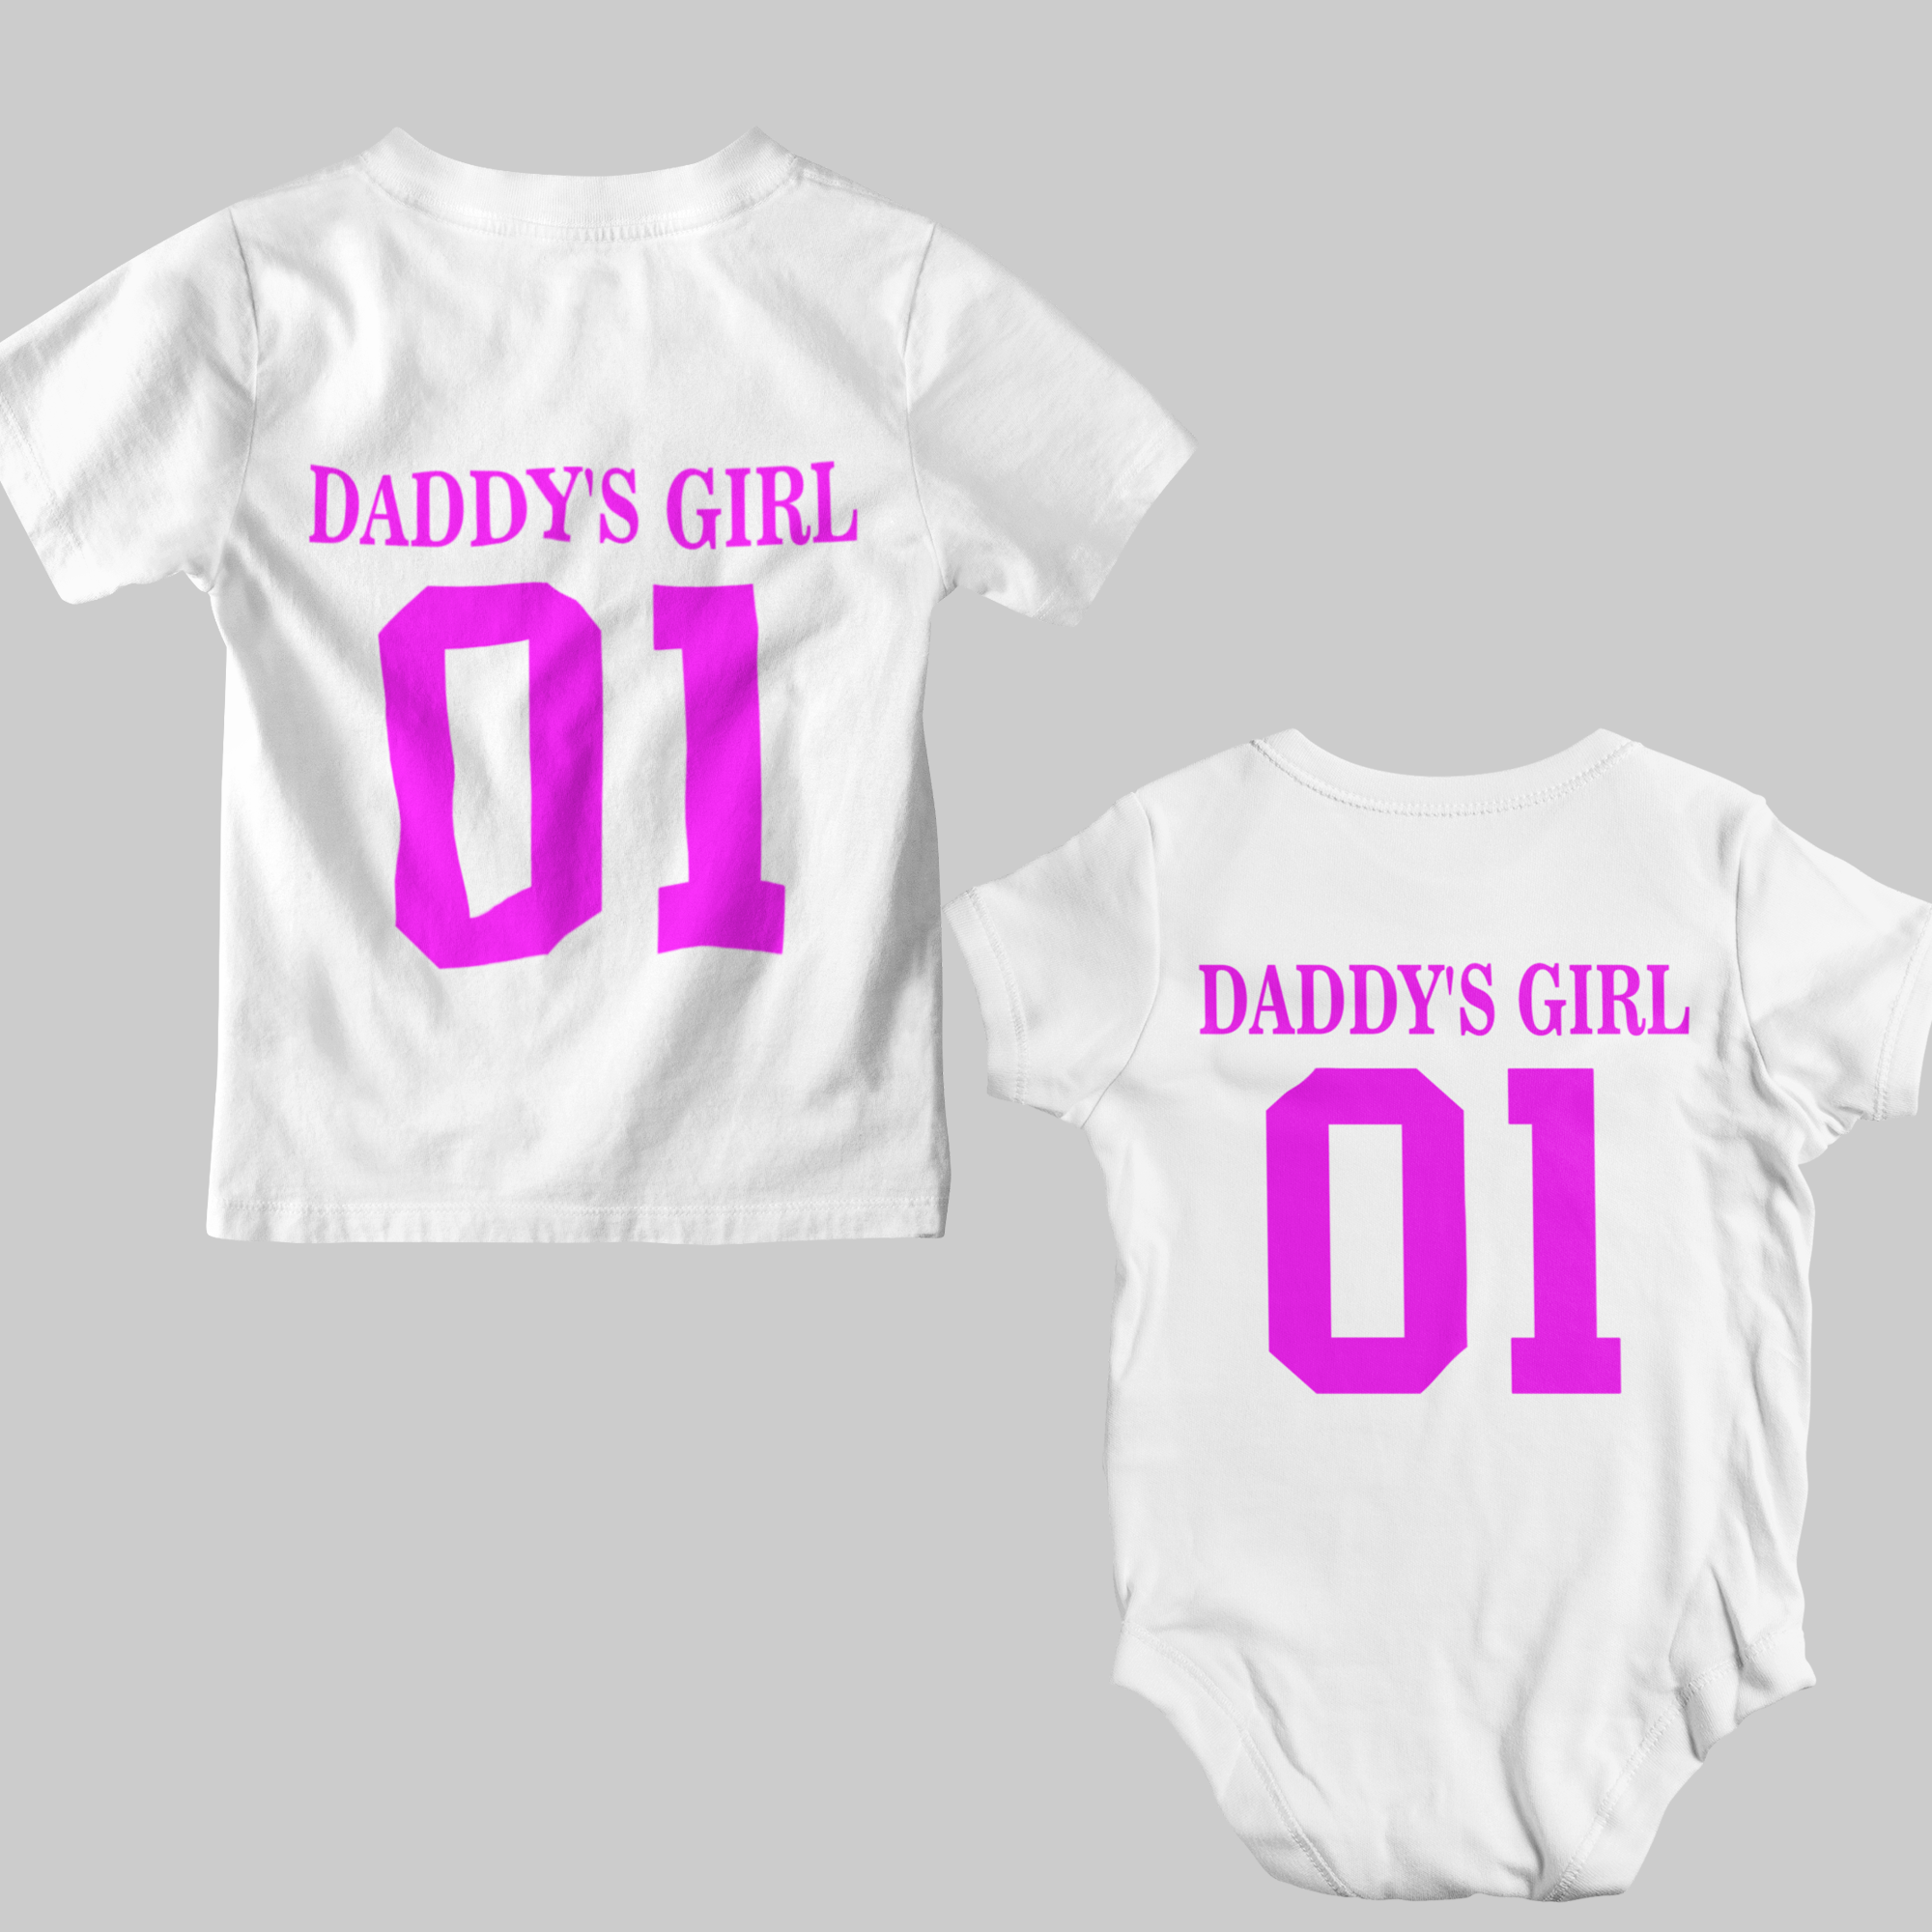 Daddy + Daddy's Girl Number Combo Black & White- Onesie + Adult T-shirt